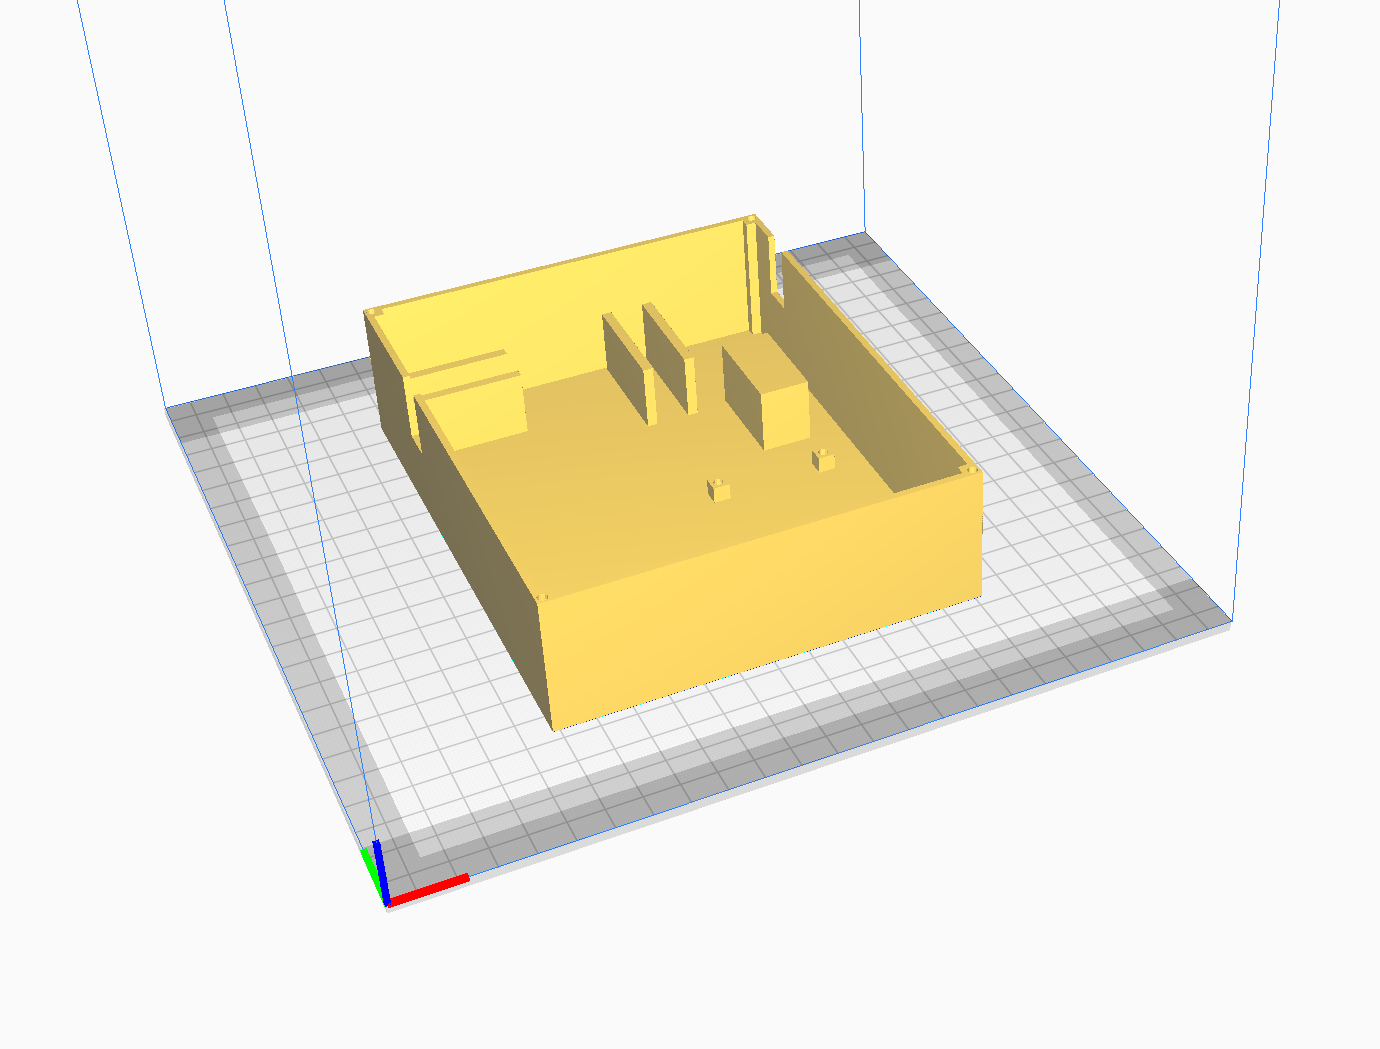 A rendering of the enclosure base in the Cura slicer.